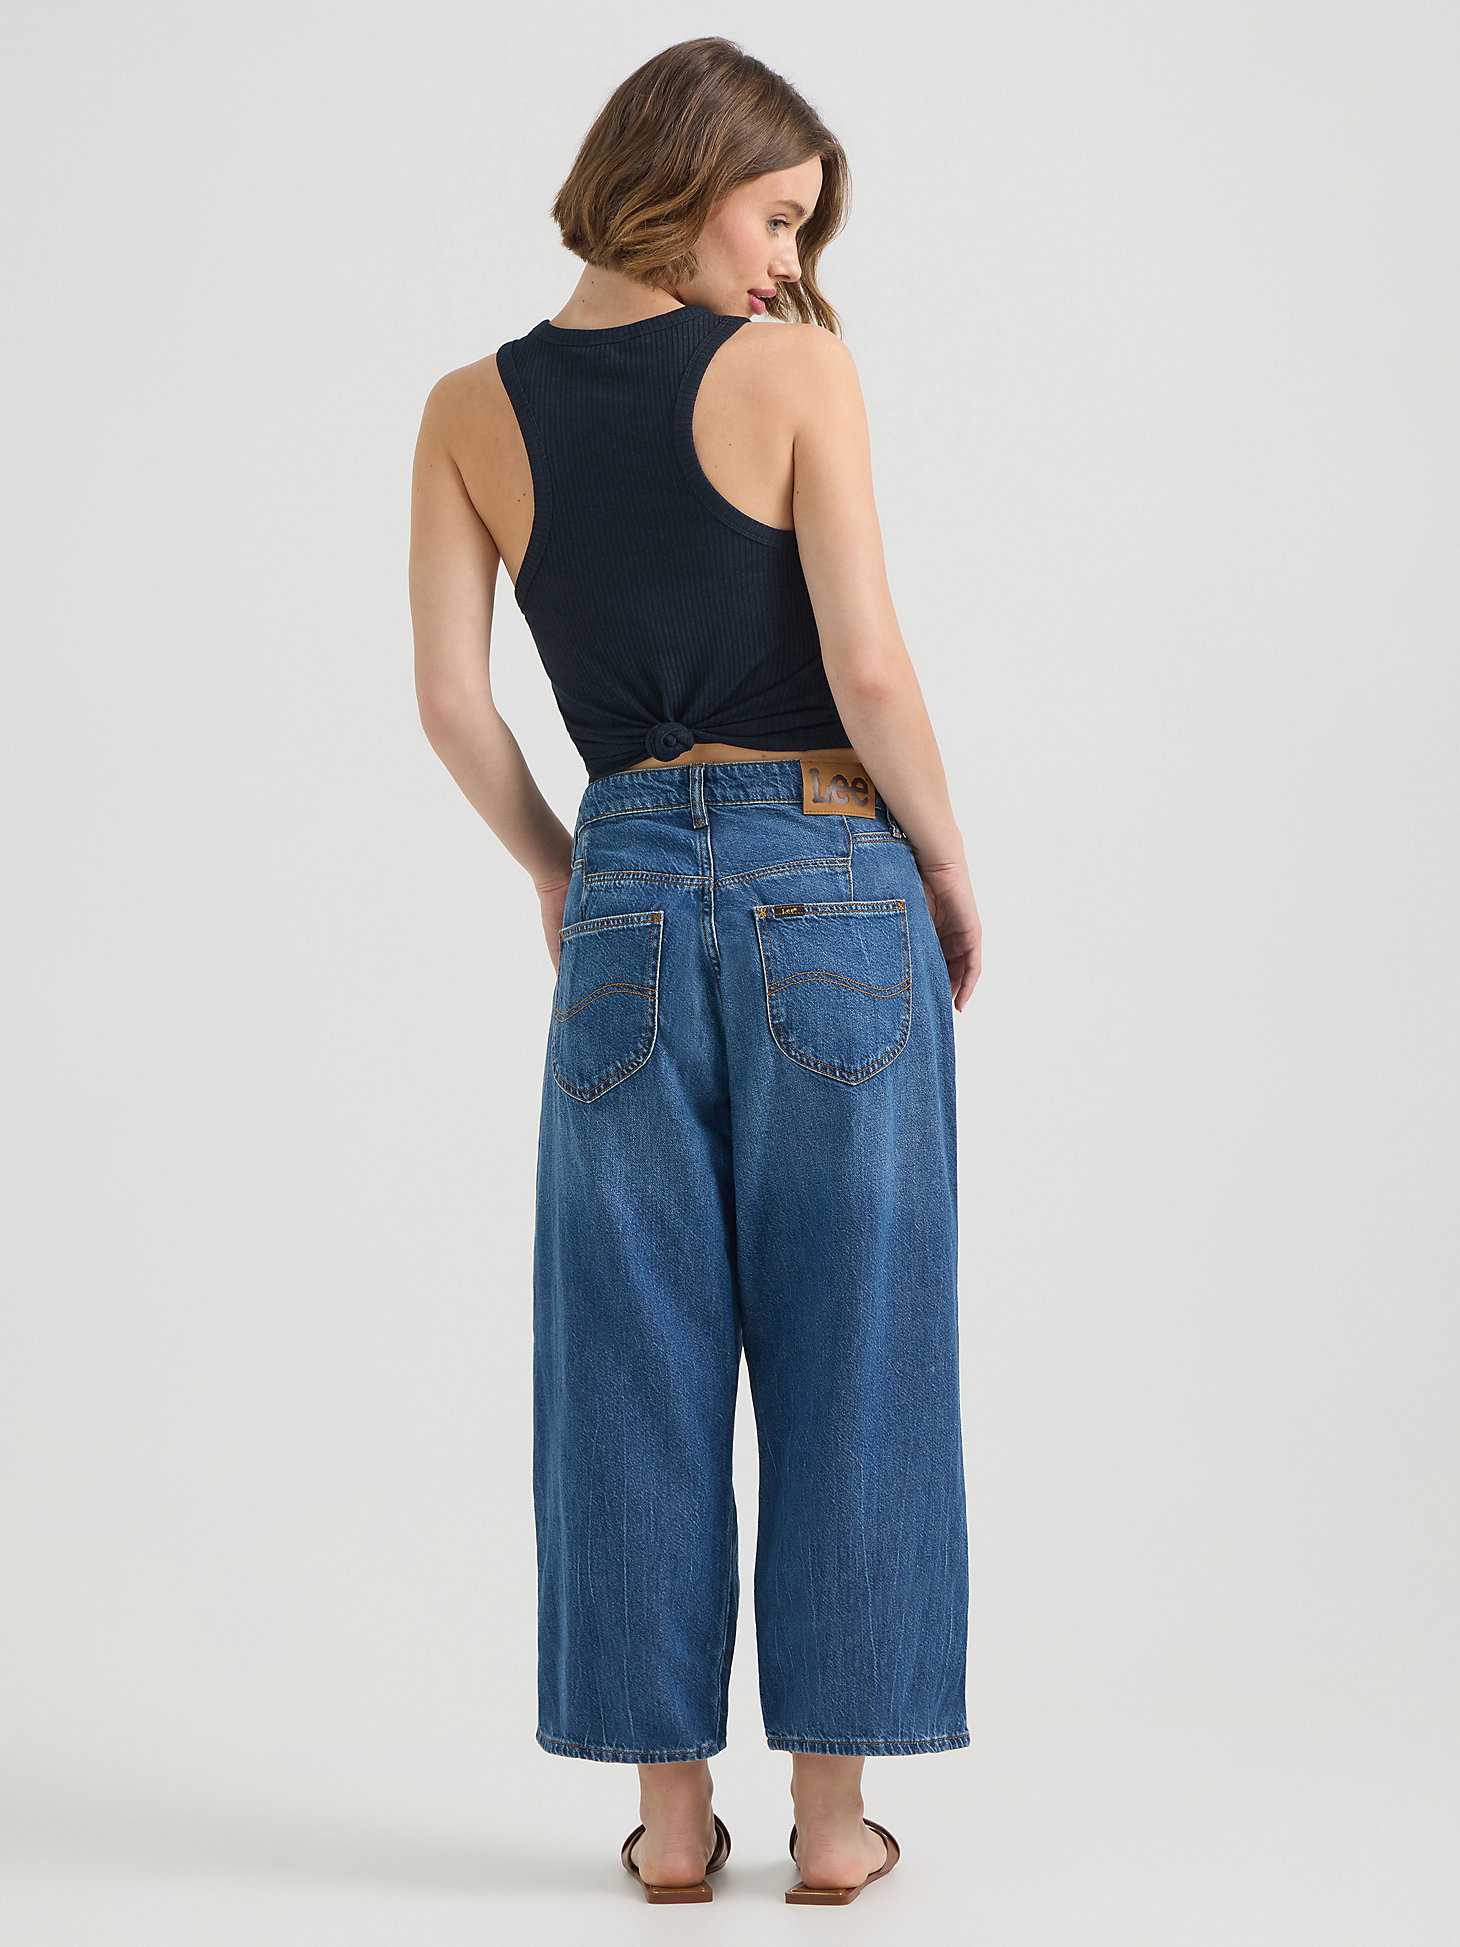 Women's Loose Crop Button-Fly Jean in Robust Blue alternative view 2